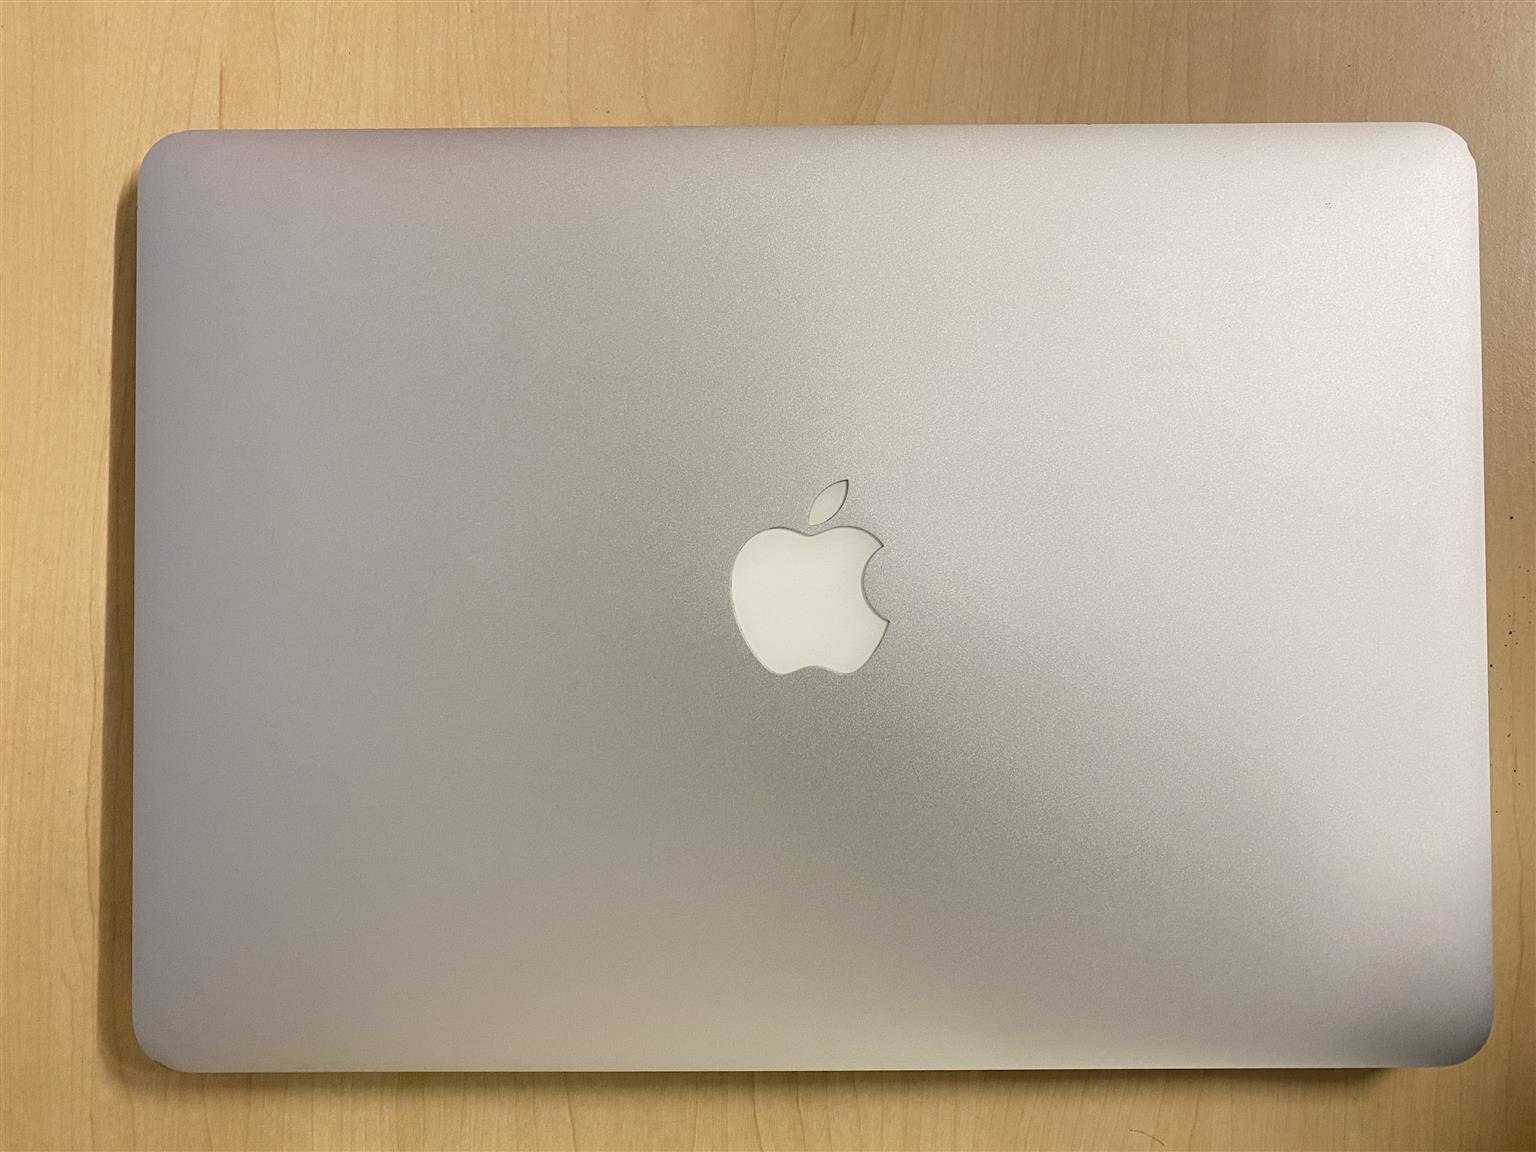 MacBook Air 2015 Core i5 128GB SSD 4GB Ram 13`` Display Excellent Condition